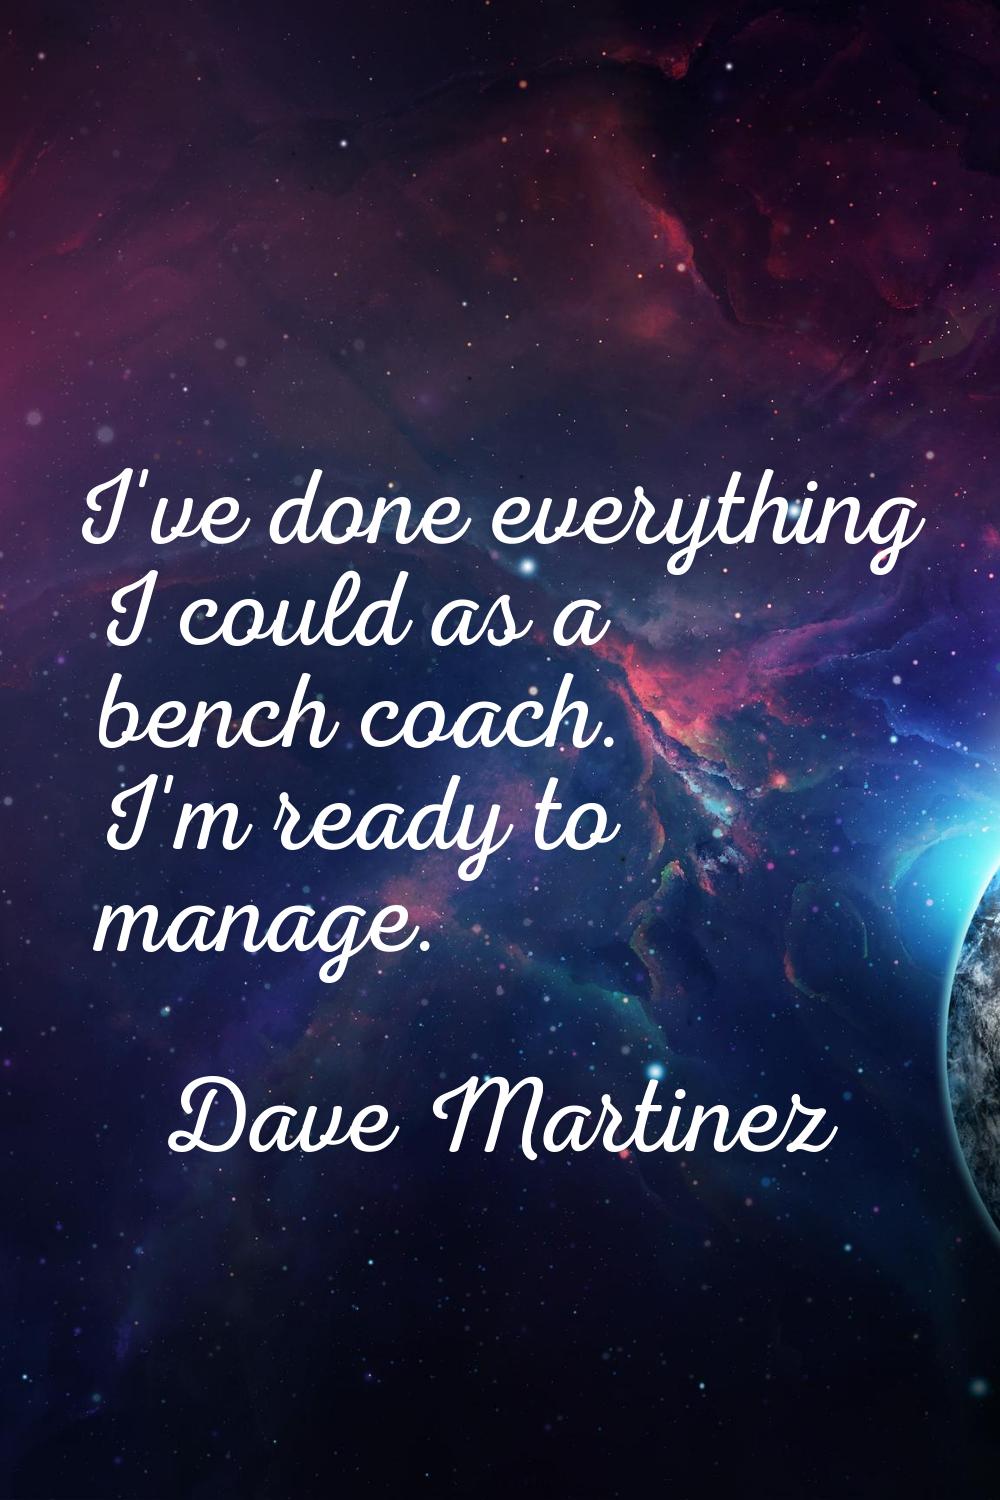 I've done everything I could as a bench coach. I'm ready to manage.